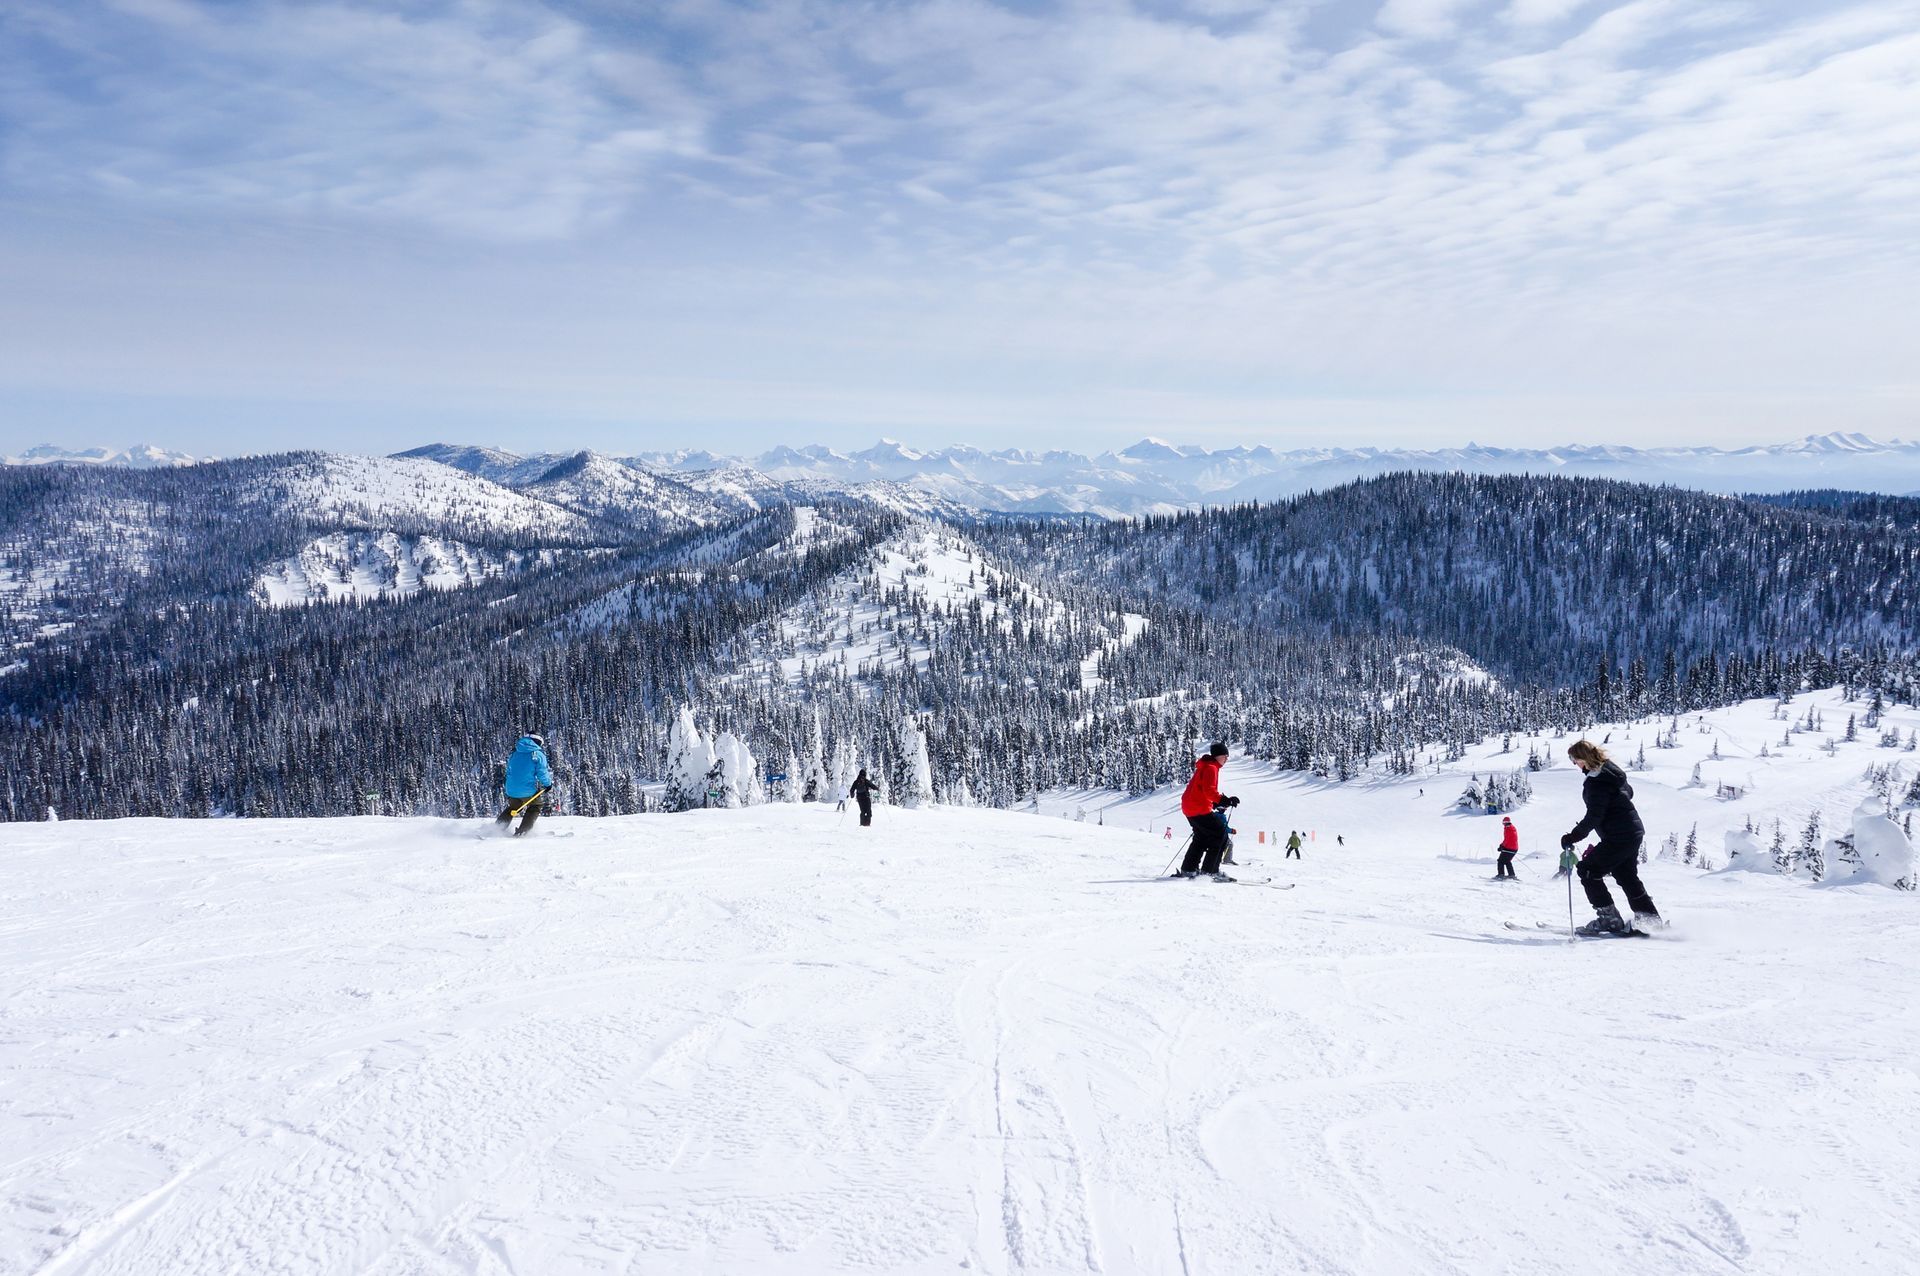 a group of people are skiing down a snow covered slope .